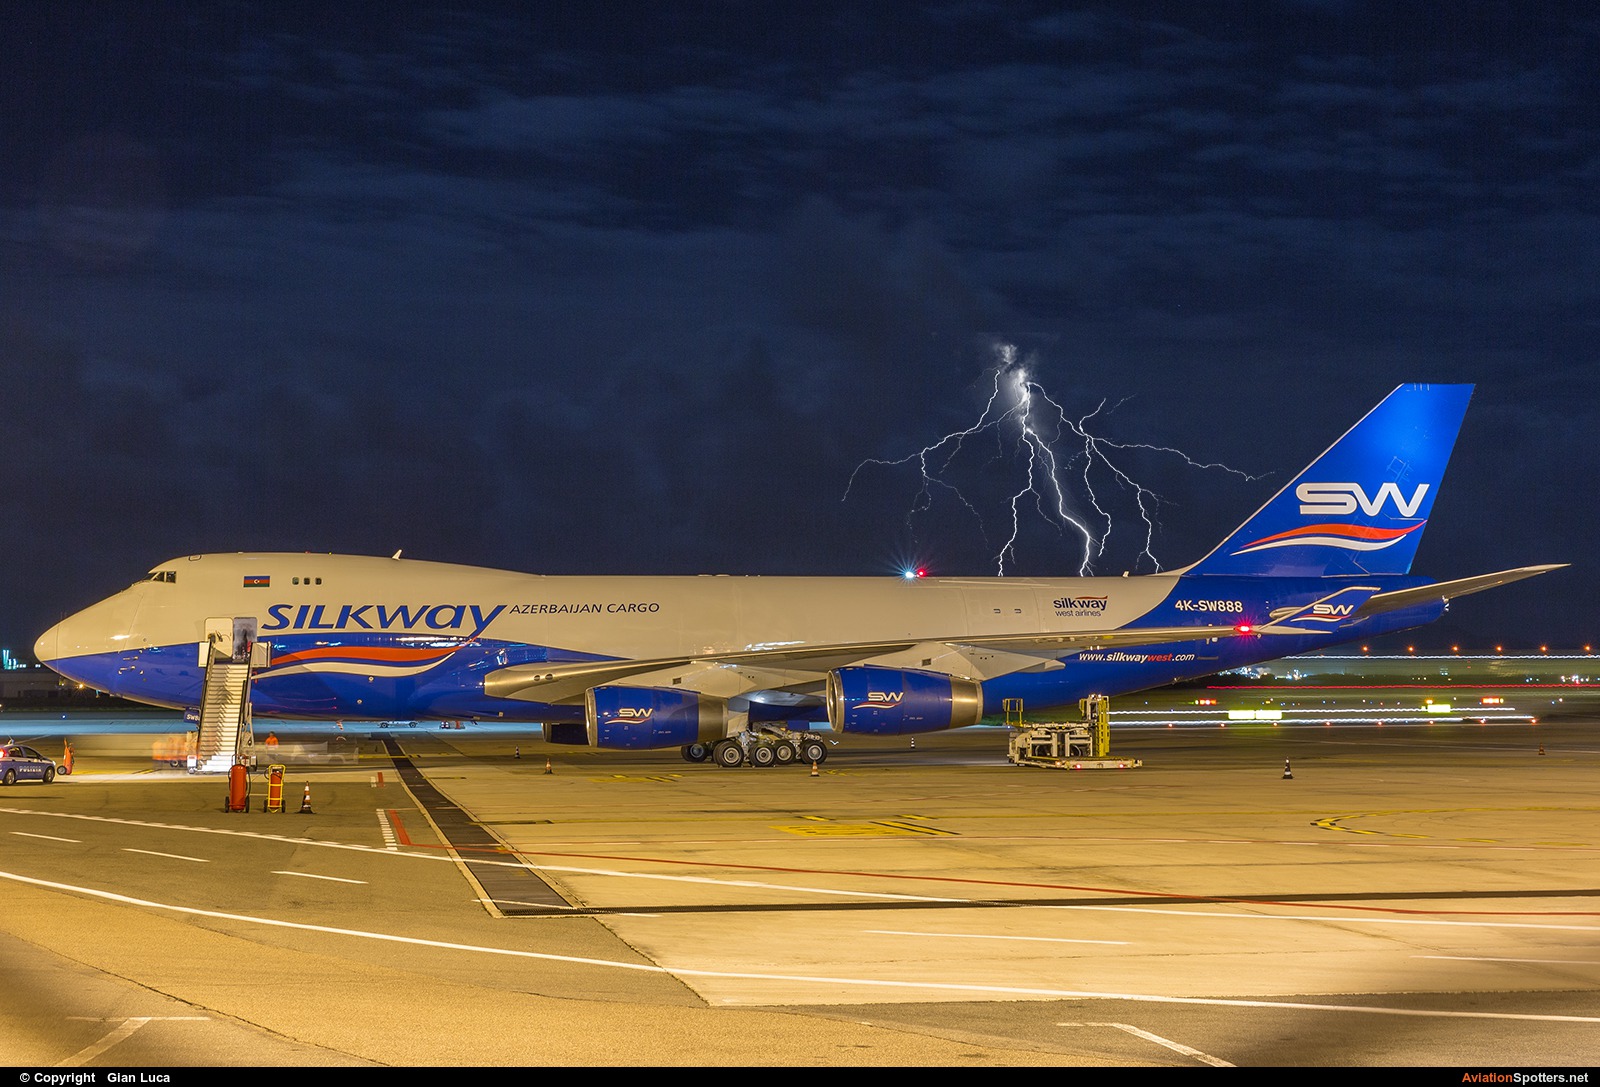 Silk Way Airlines  -  747-400F  (4K-SW888) By Onnis G.Luca Sardegna Spotters (Onnis84)